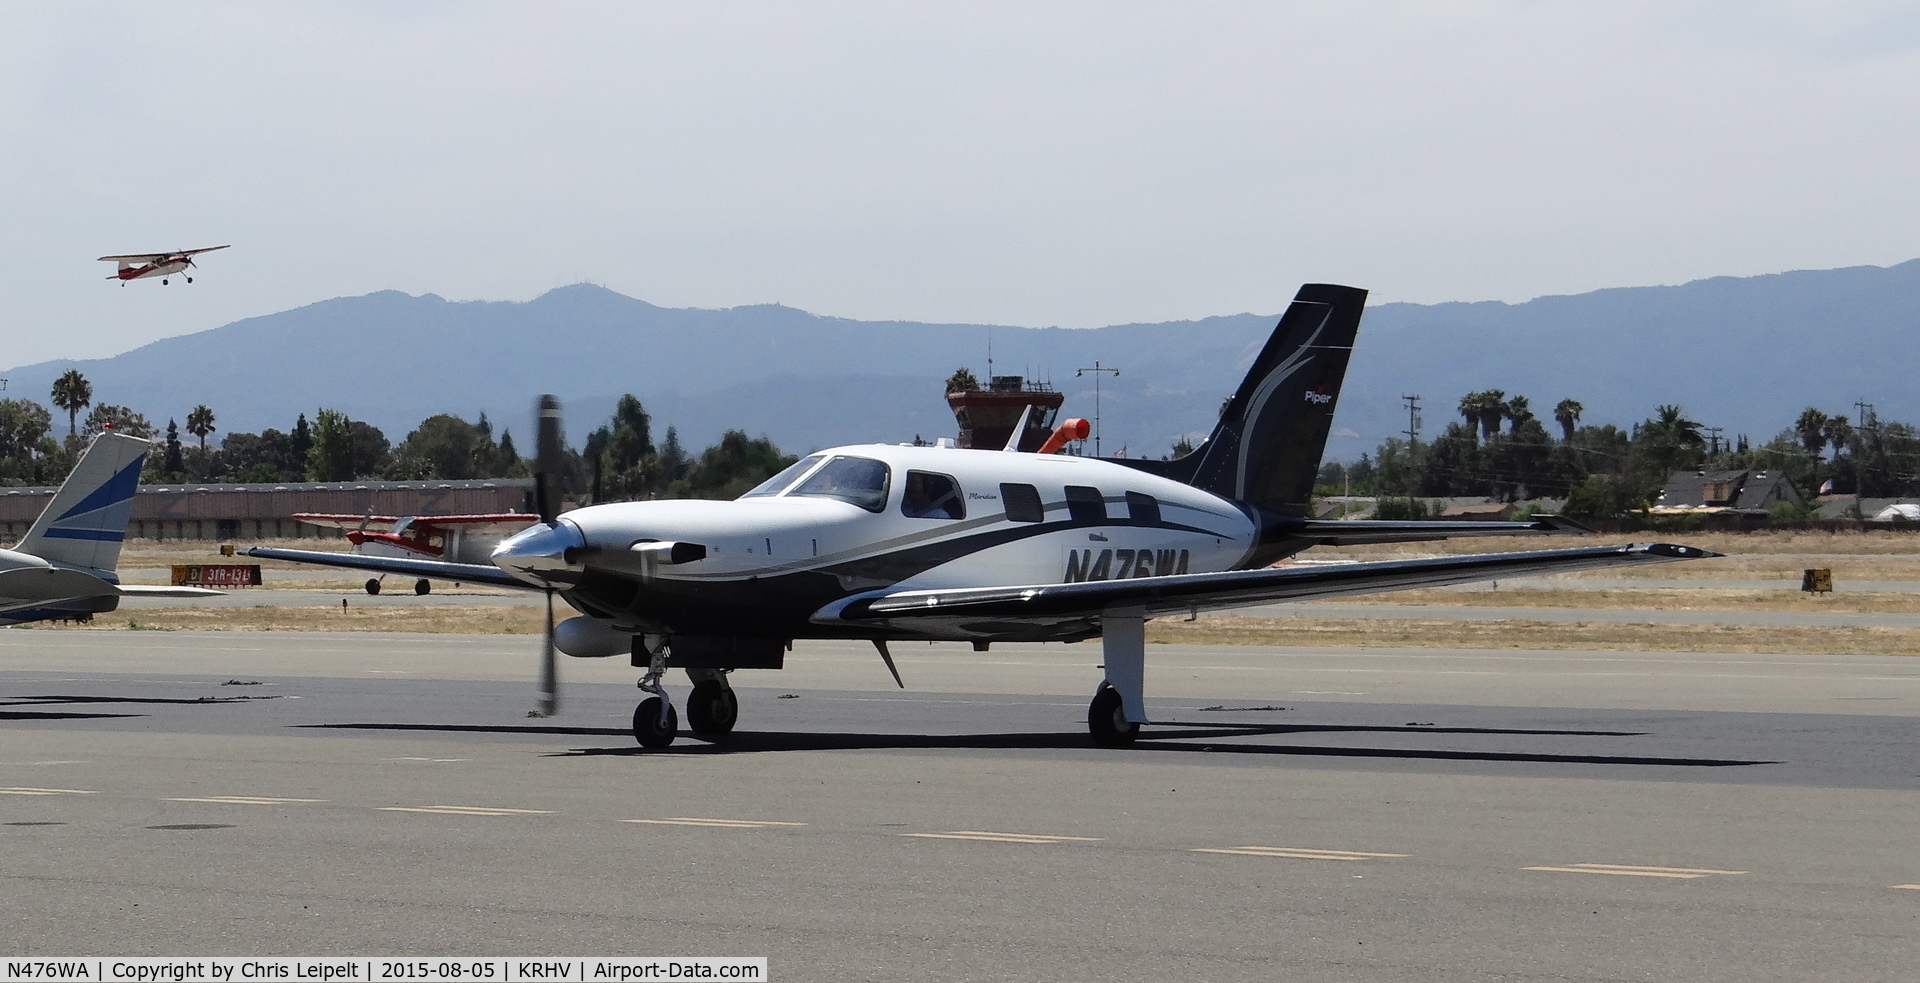 N476WA, Piper PA-46-500TP Meridian C/N 4697476, BDQ Properties LLC (Placerville, CA) beautiful Piper Meridian starting up at the transient ramp at Reid Hillview Airport, CA. It's a local visitor, comes a few times a month.